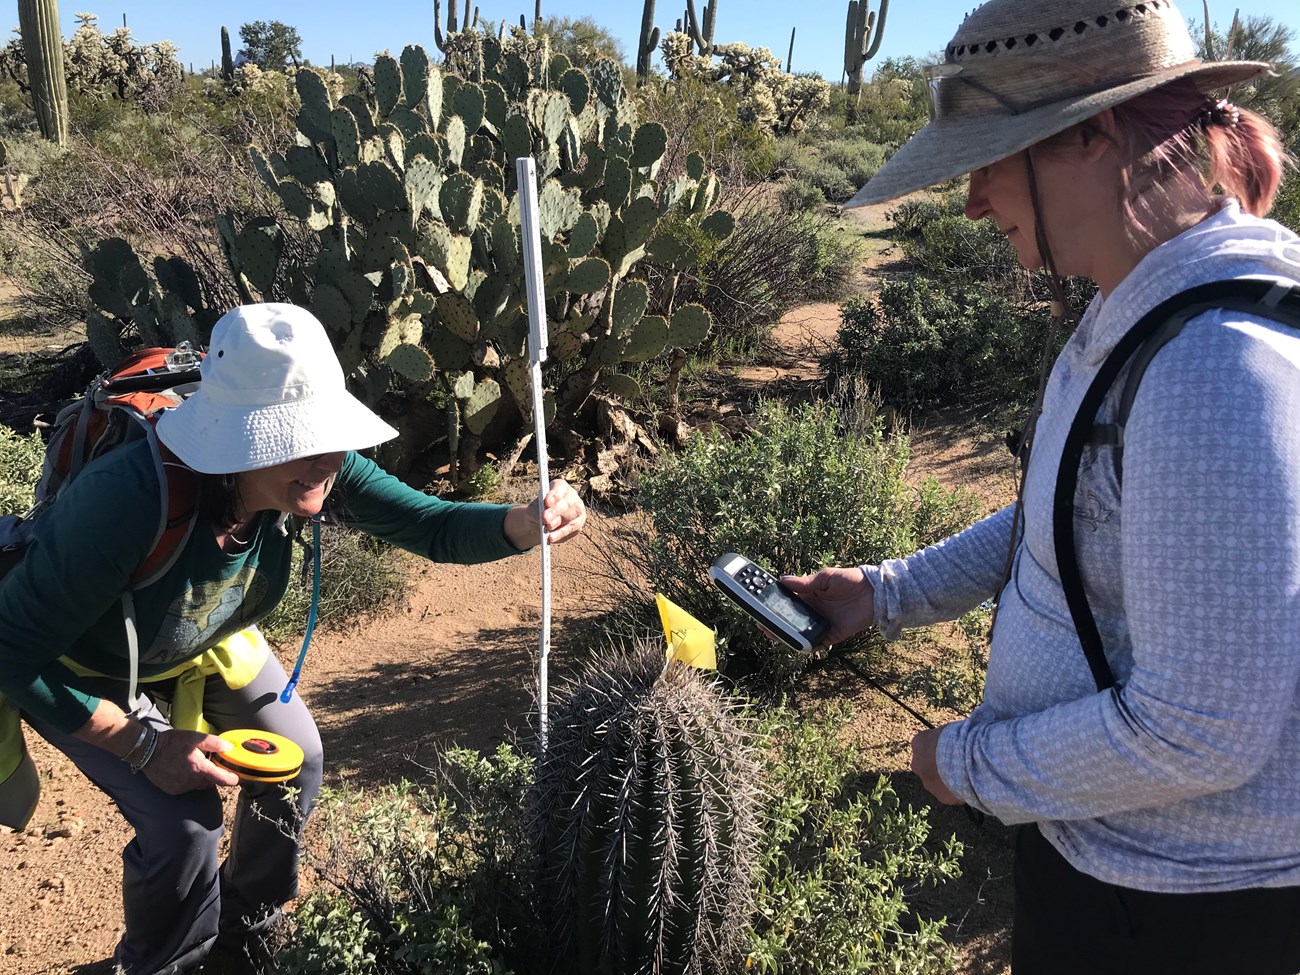 Volunteers work together to collect field data